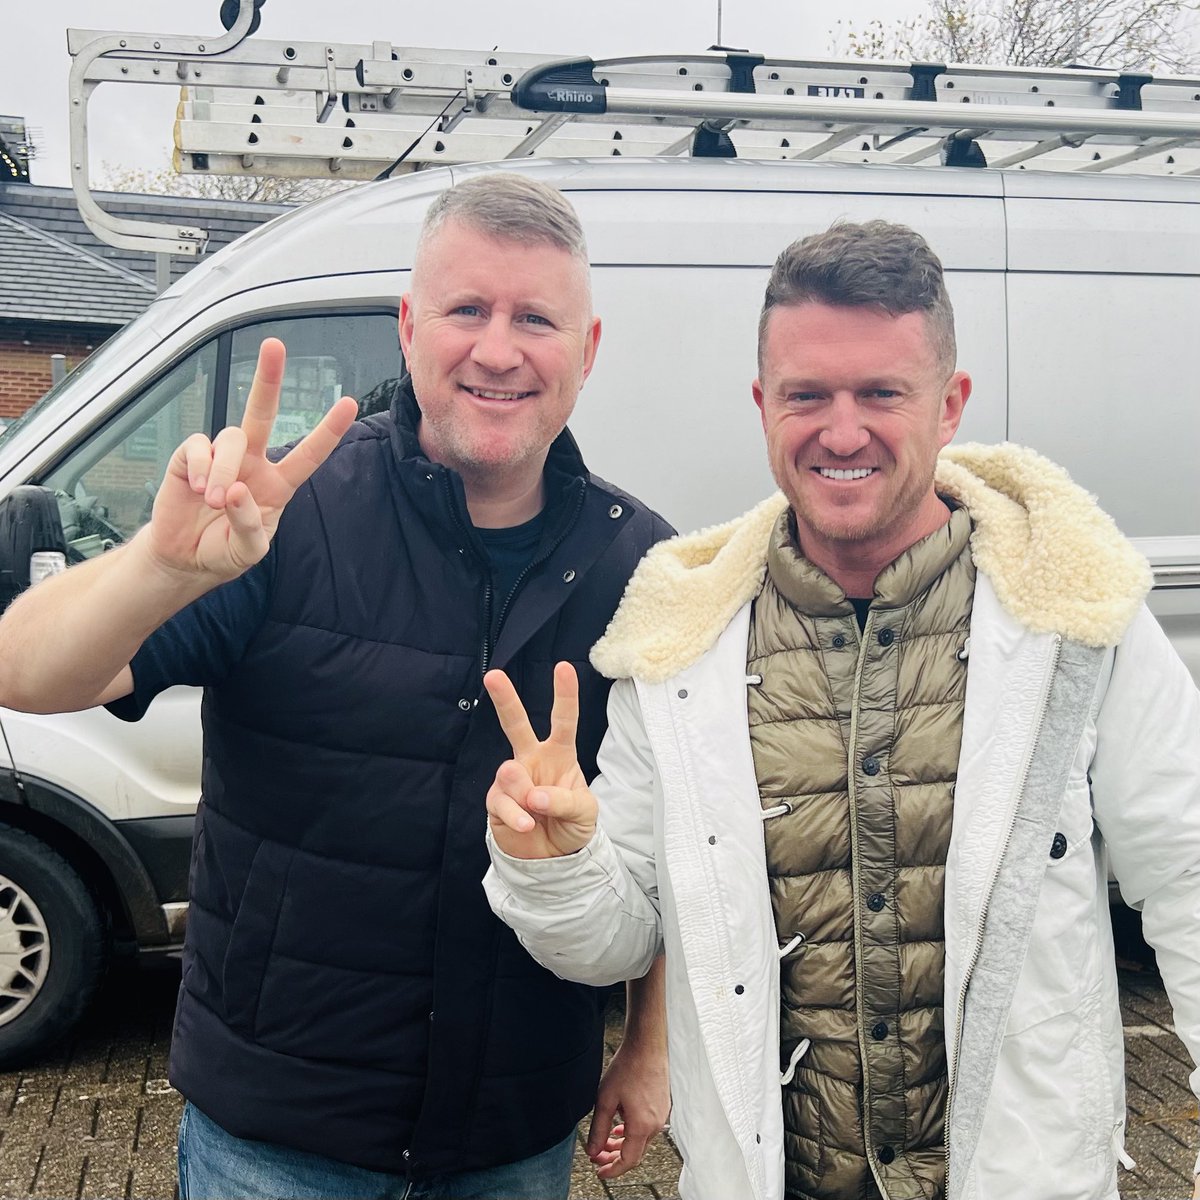 Just dropped Tommy @TRobinsonNewEra off to his family. Luckily, the police took him to a station down the road from me. What the police did to him yesterday was disgusting and outrageous.